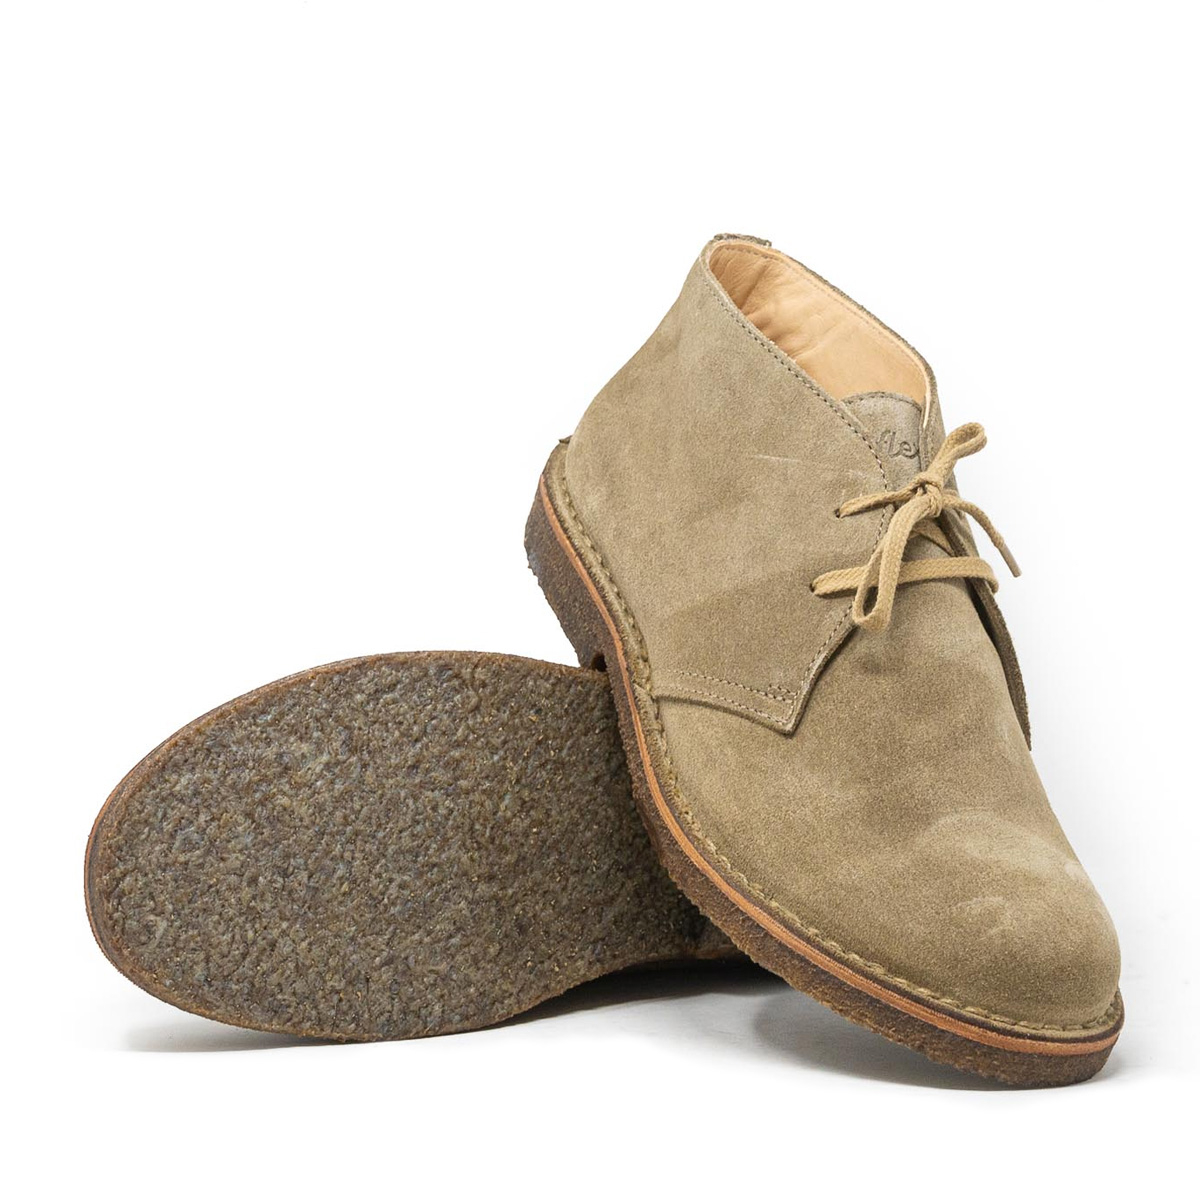 Astorflex Greenflex Boot Stone, a timeless classic and a must-have for modern shoe enthusiasts